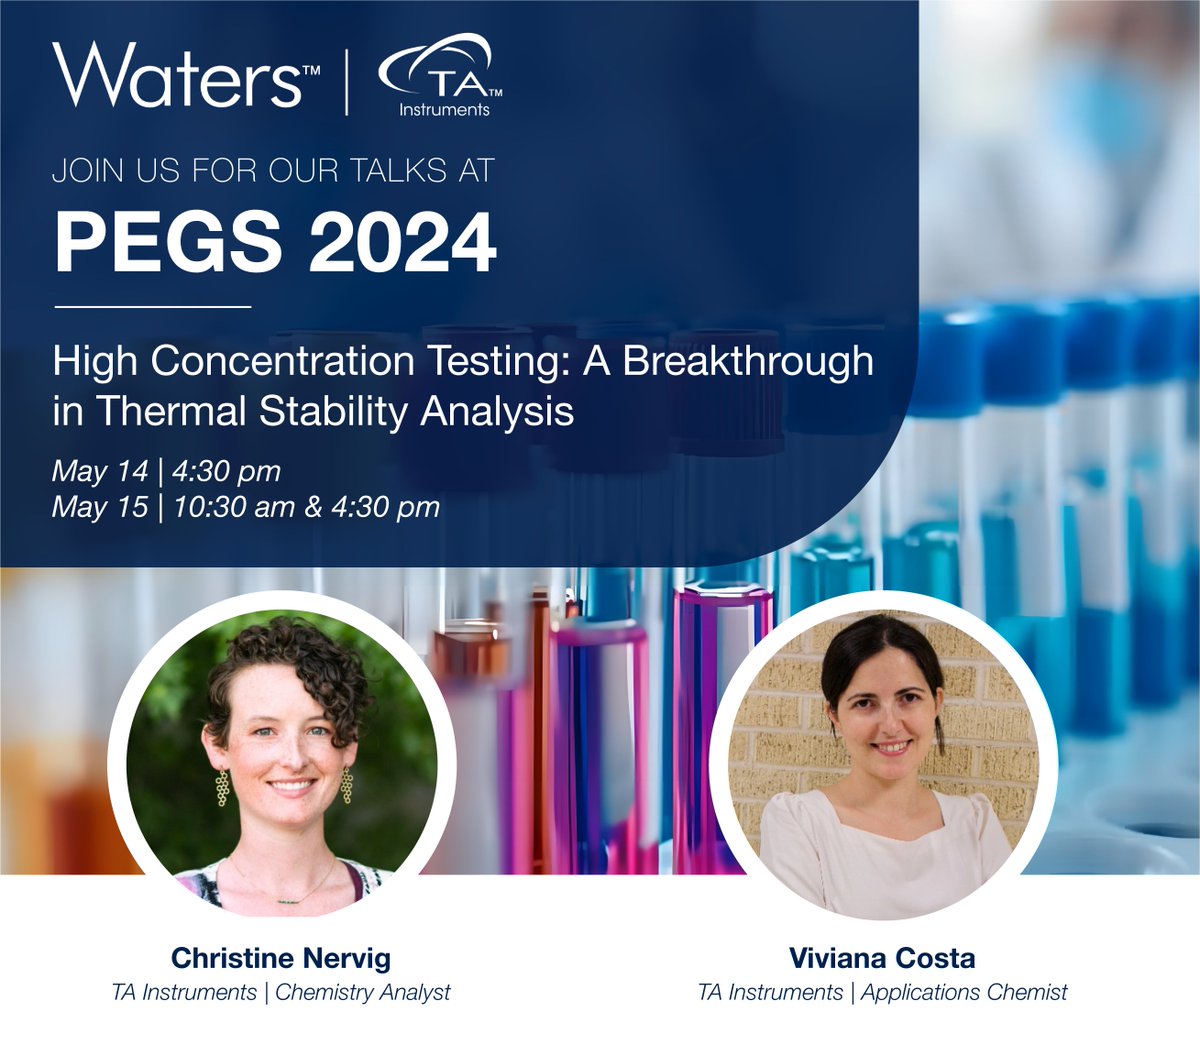 Visit us at @PEGSboston booth 417 to see industry-leading biopharma analysis technology. And don't miss our poster B090 on high concentration thermal stability analysis. #PEGSummit #Biopharma